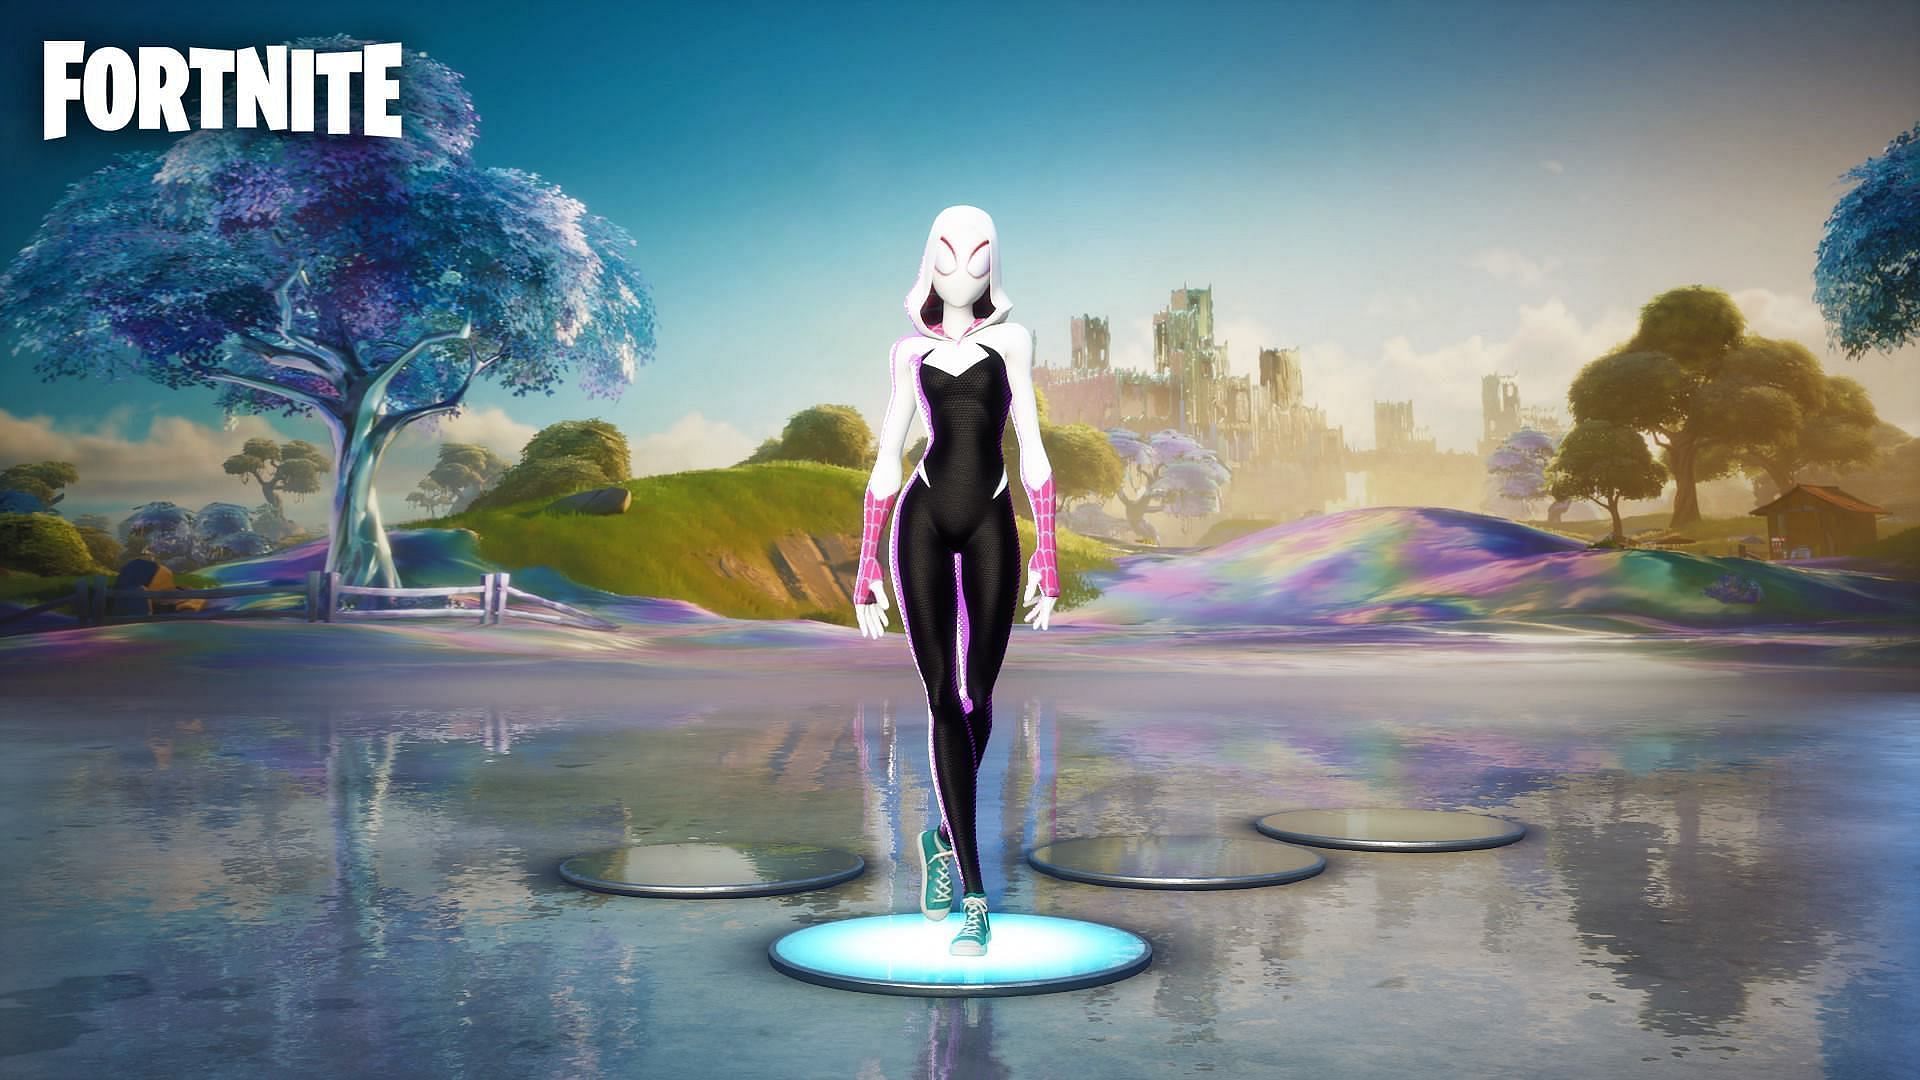 The Spider-Gwen Fortnite skin is available in the Chapter 3 Season 4 Battle Pass (Image via Sportskeeda)